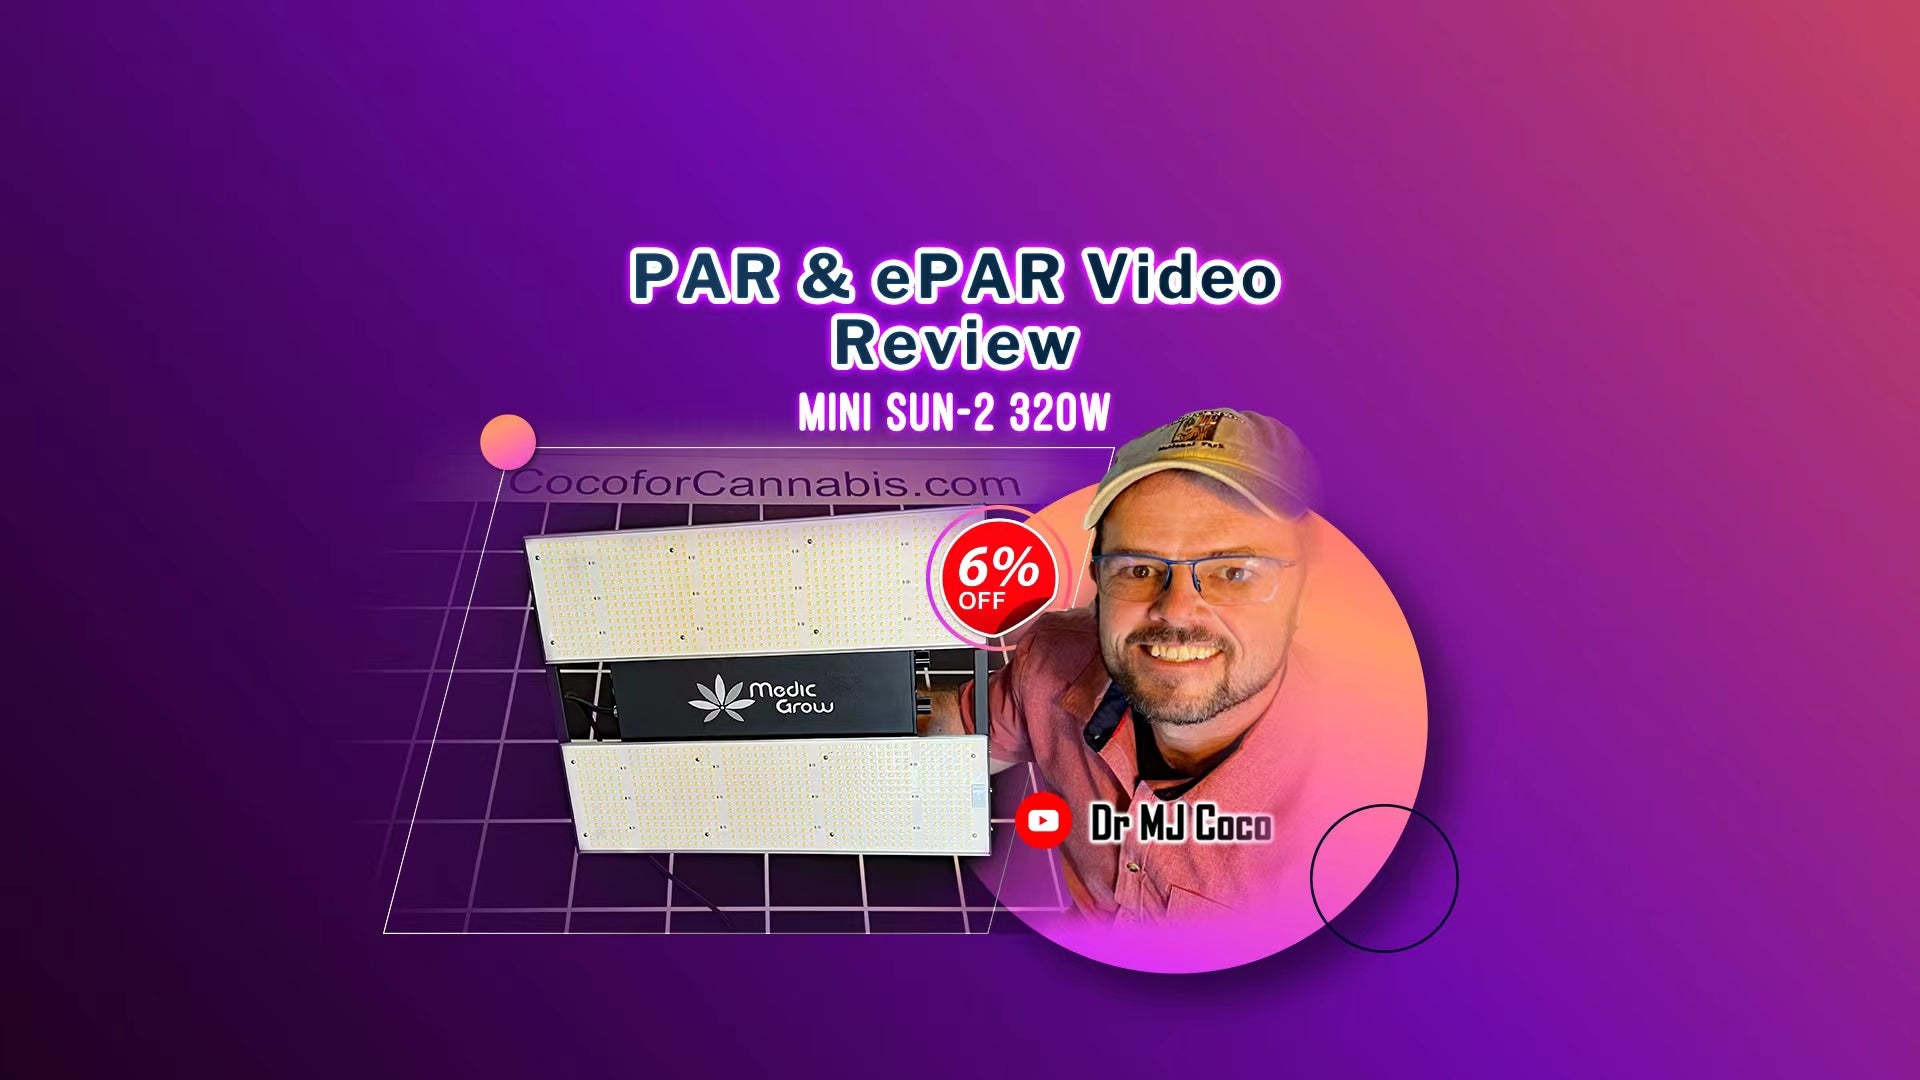 Video Review MINI SUN 2 from DR MJ COCO